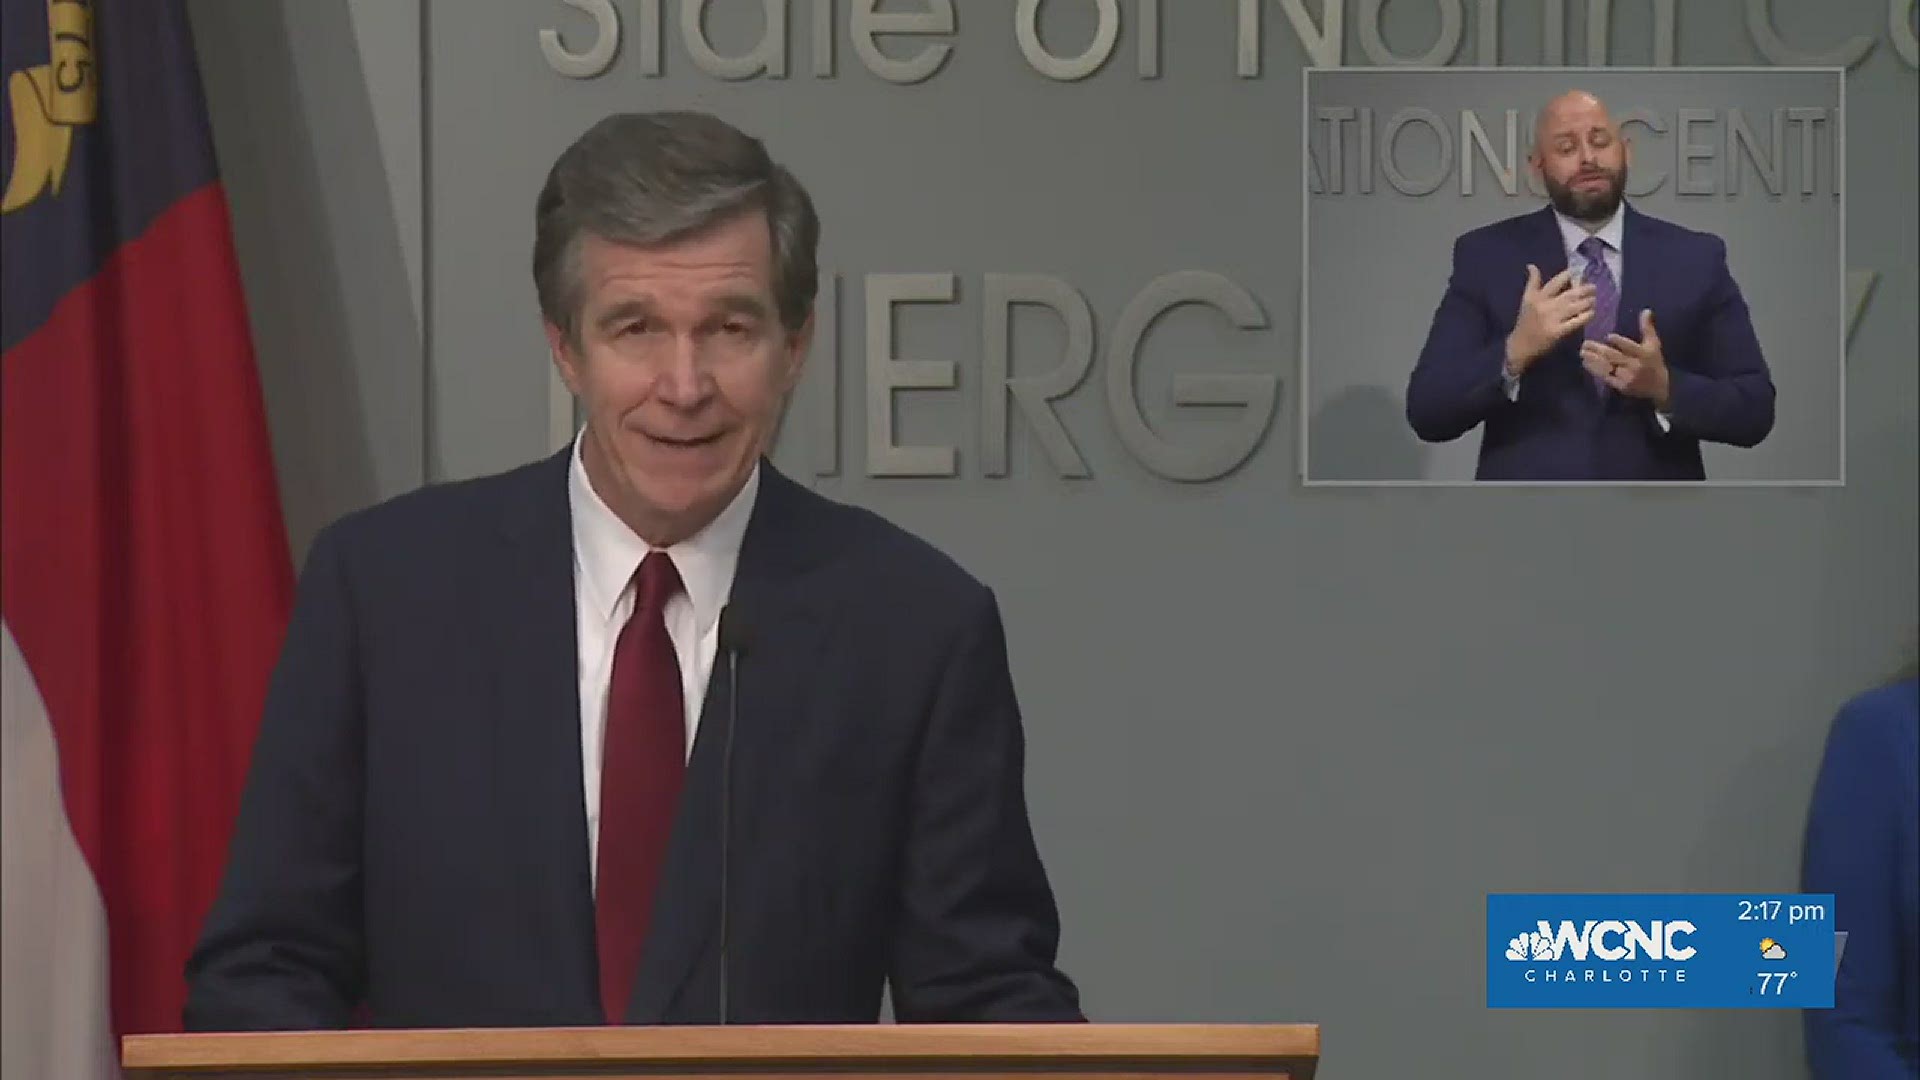 North Carolina Governor Roy Cooper says coronavirus parties to prominent herd immunity is "completely irresponsibility and unacceptable."